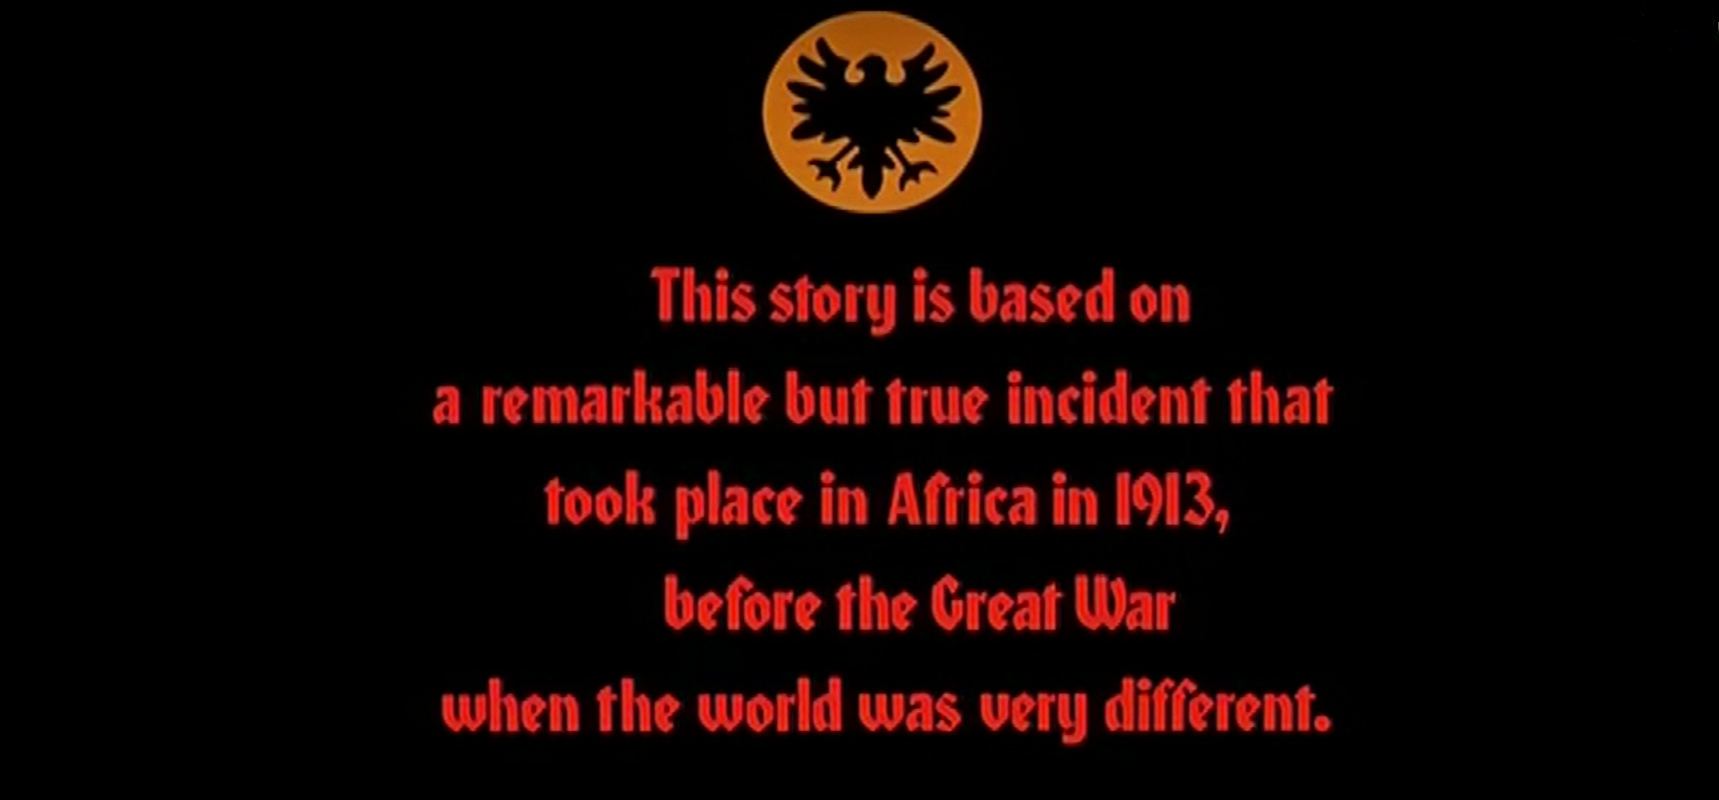 Main title from Shout at the Devil (1976) (1). This story is based on a remarkable but true incident that took place in Africa in 1913, before the Great War when the world was very different